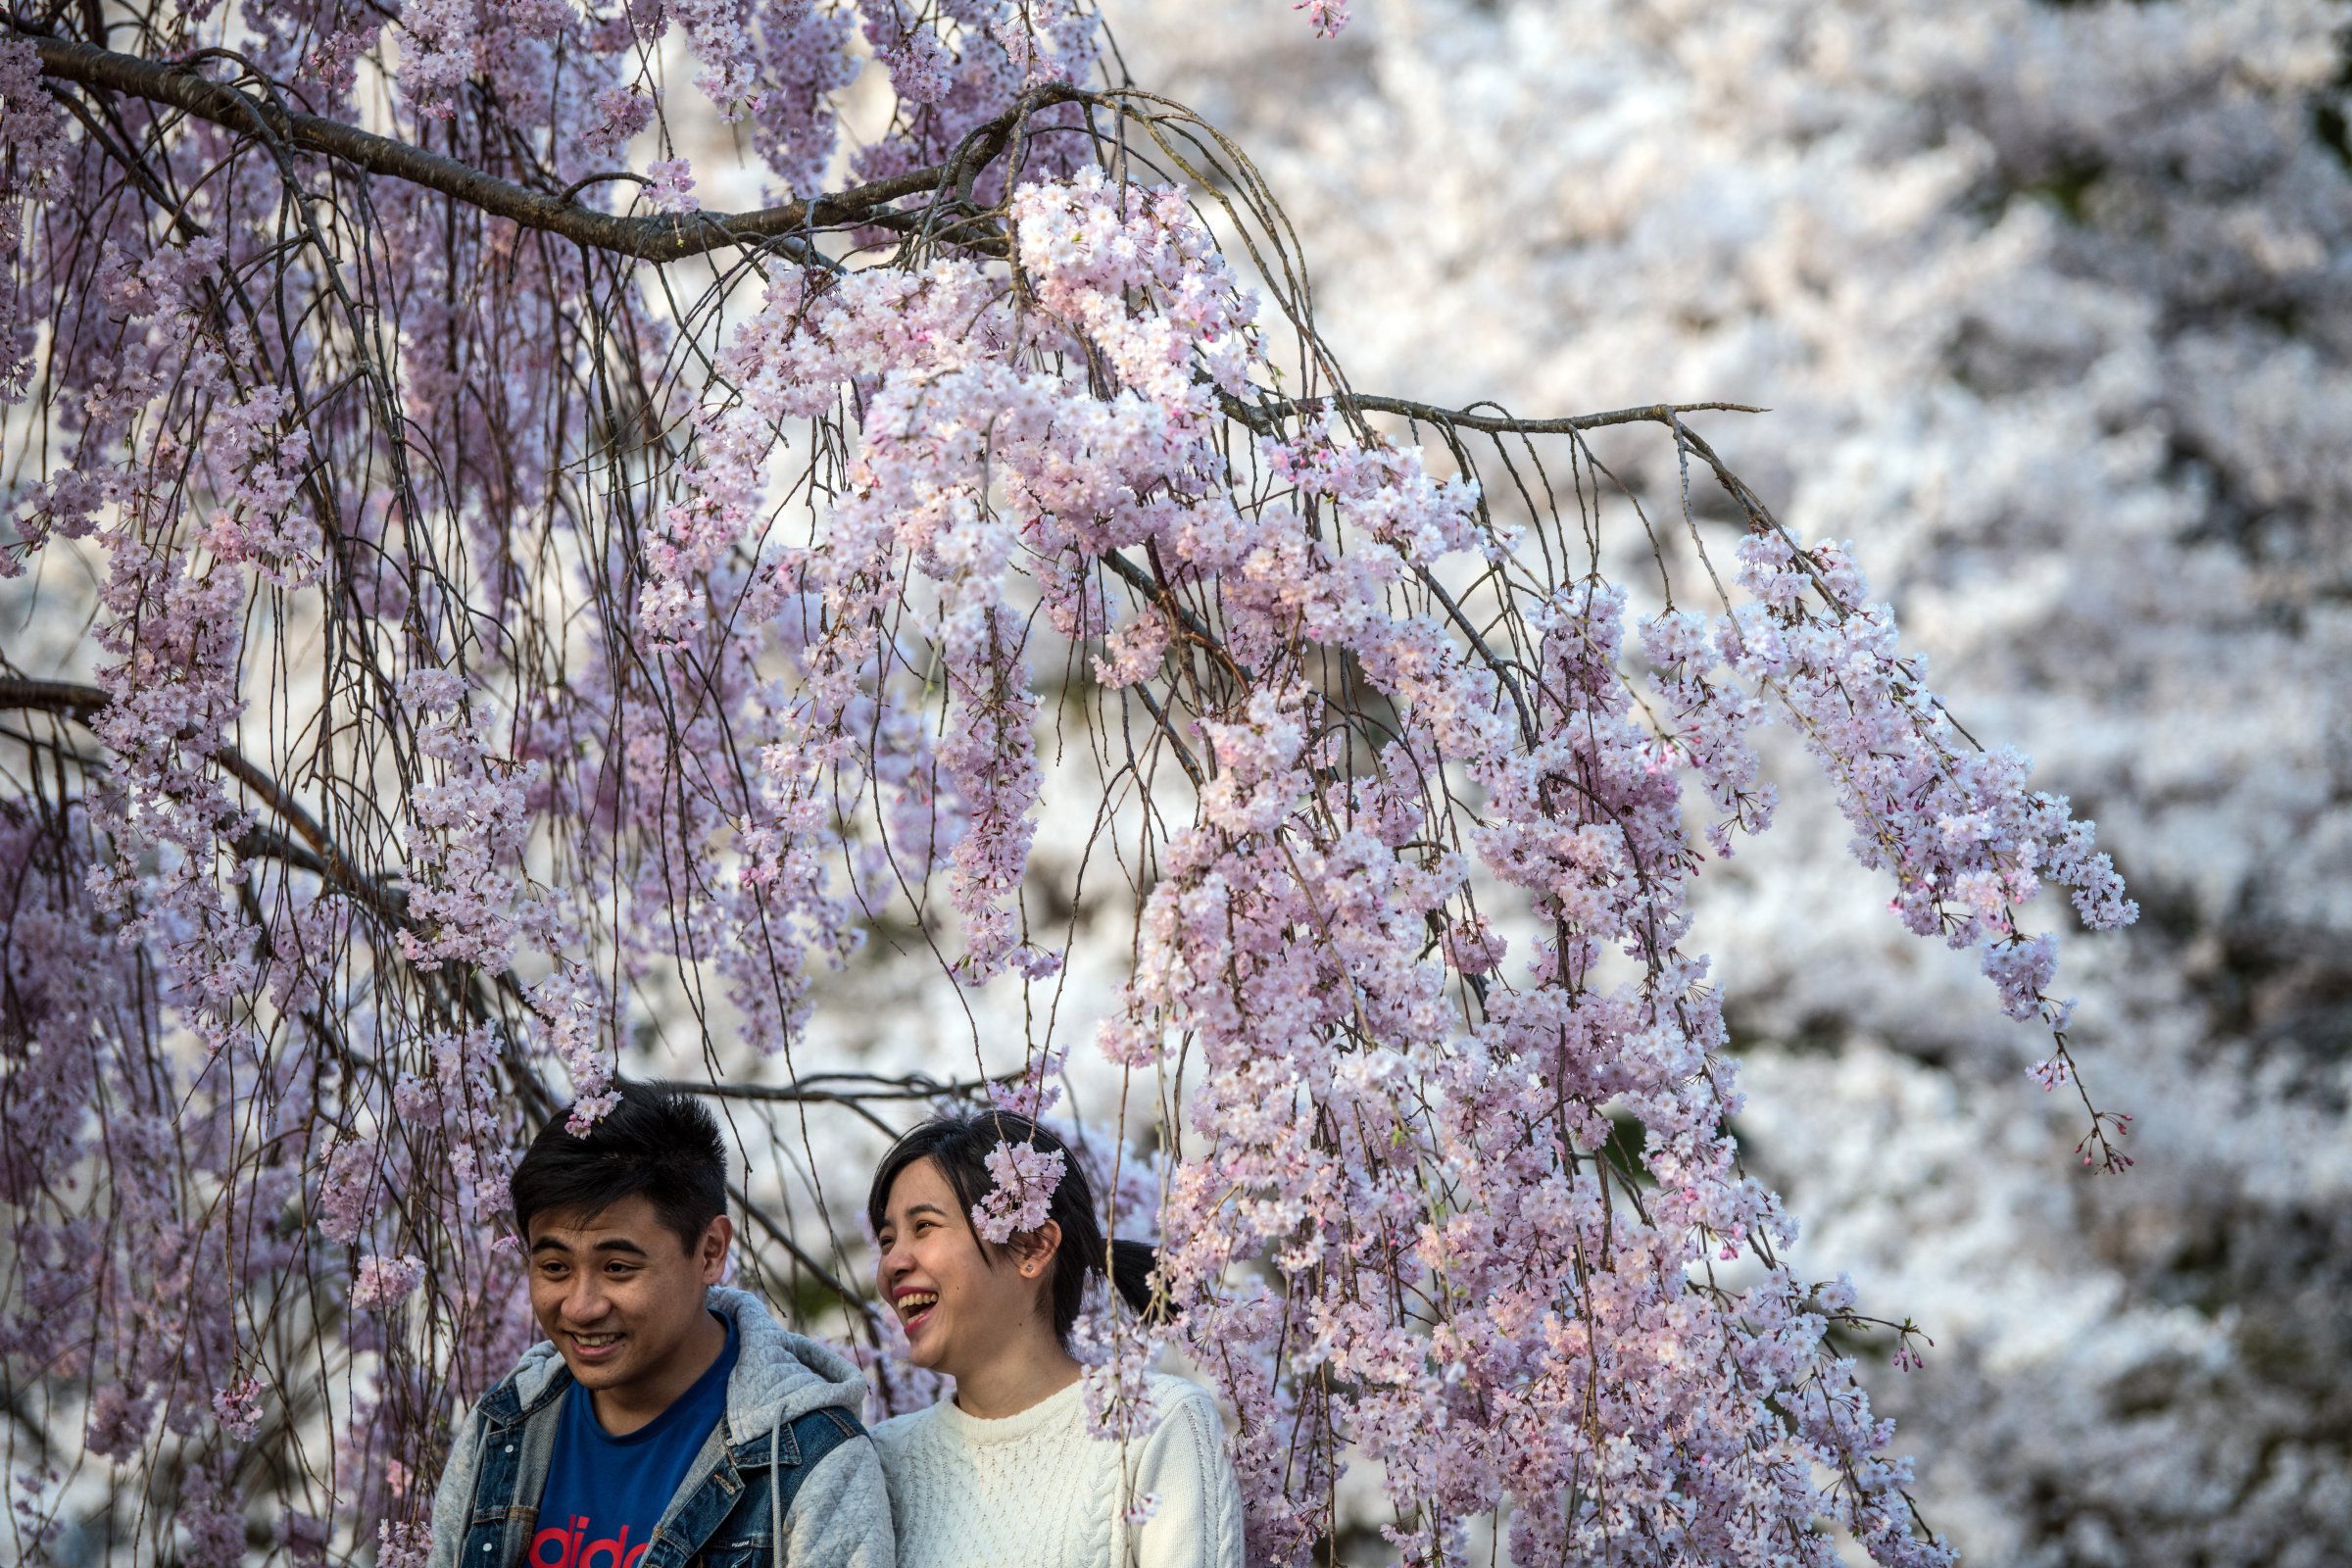 People Enjoy Cherry Blossom In Japan